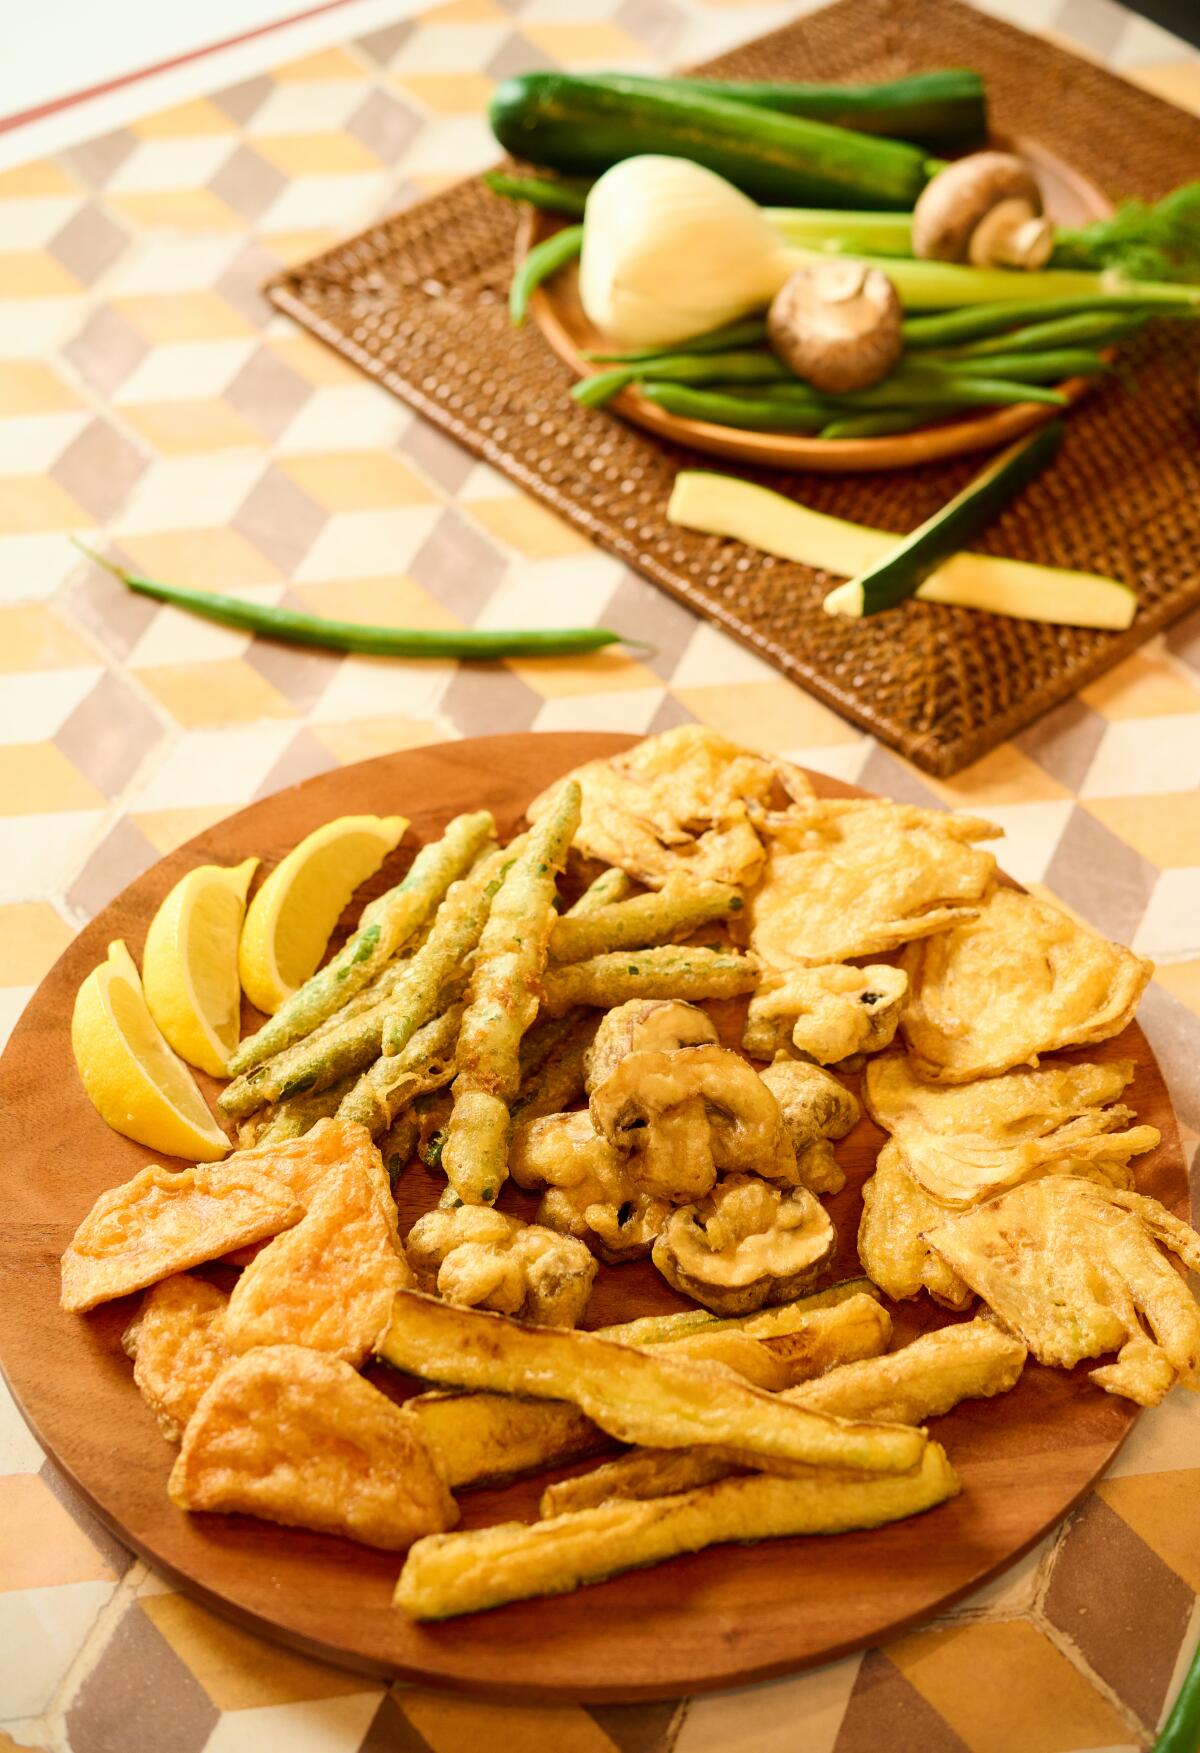 Pezzetti fritti (or "fried pieces"), mixed fried vegetables.